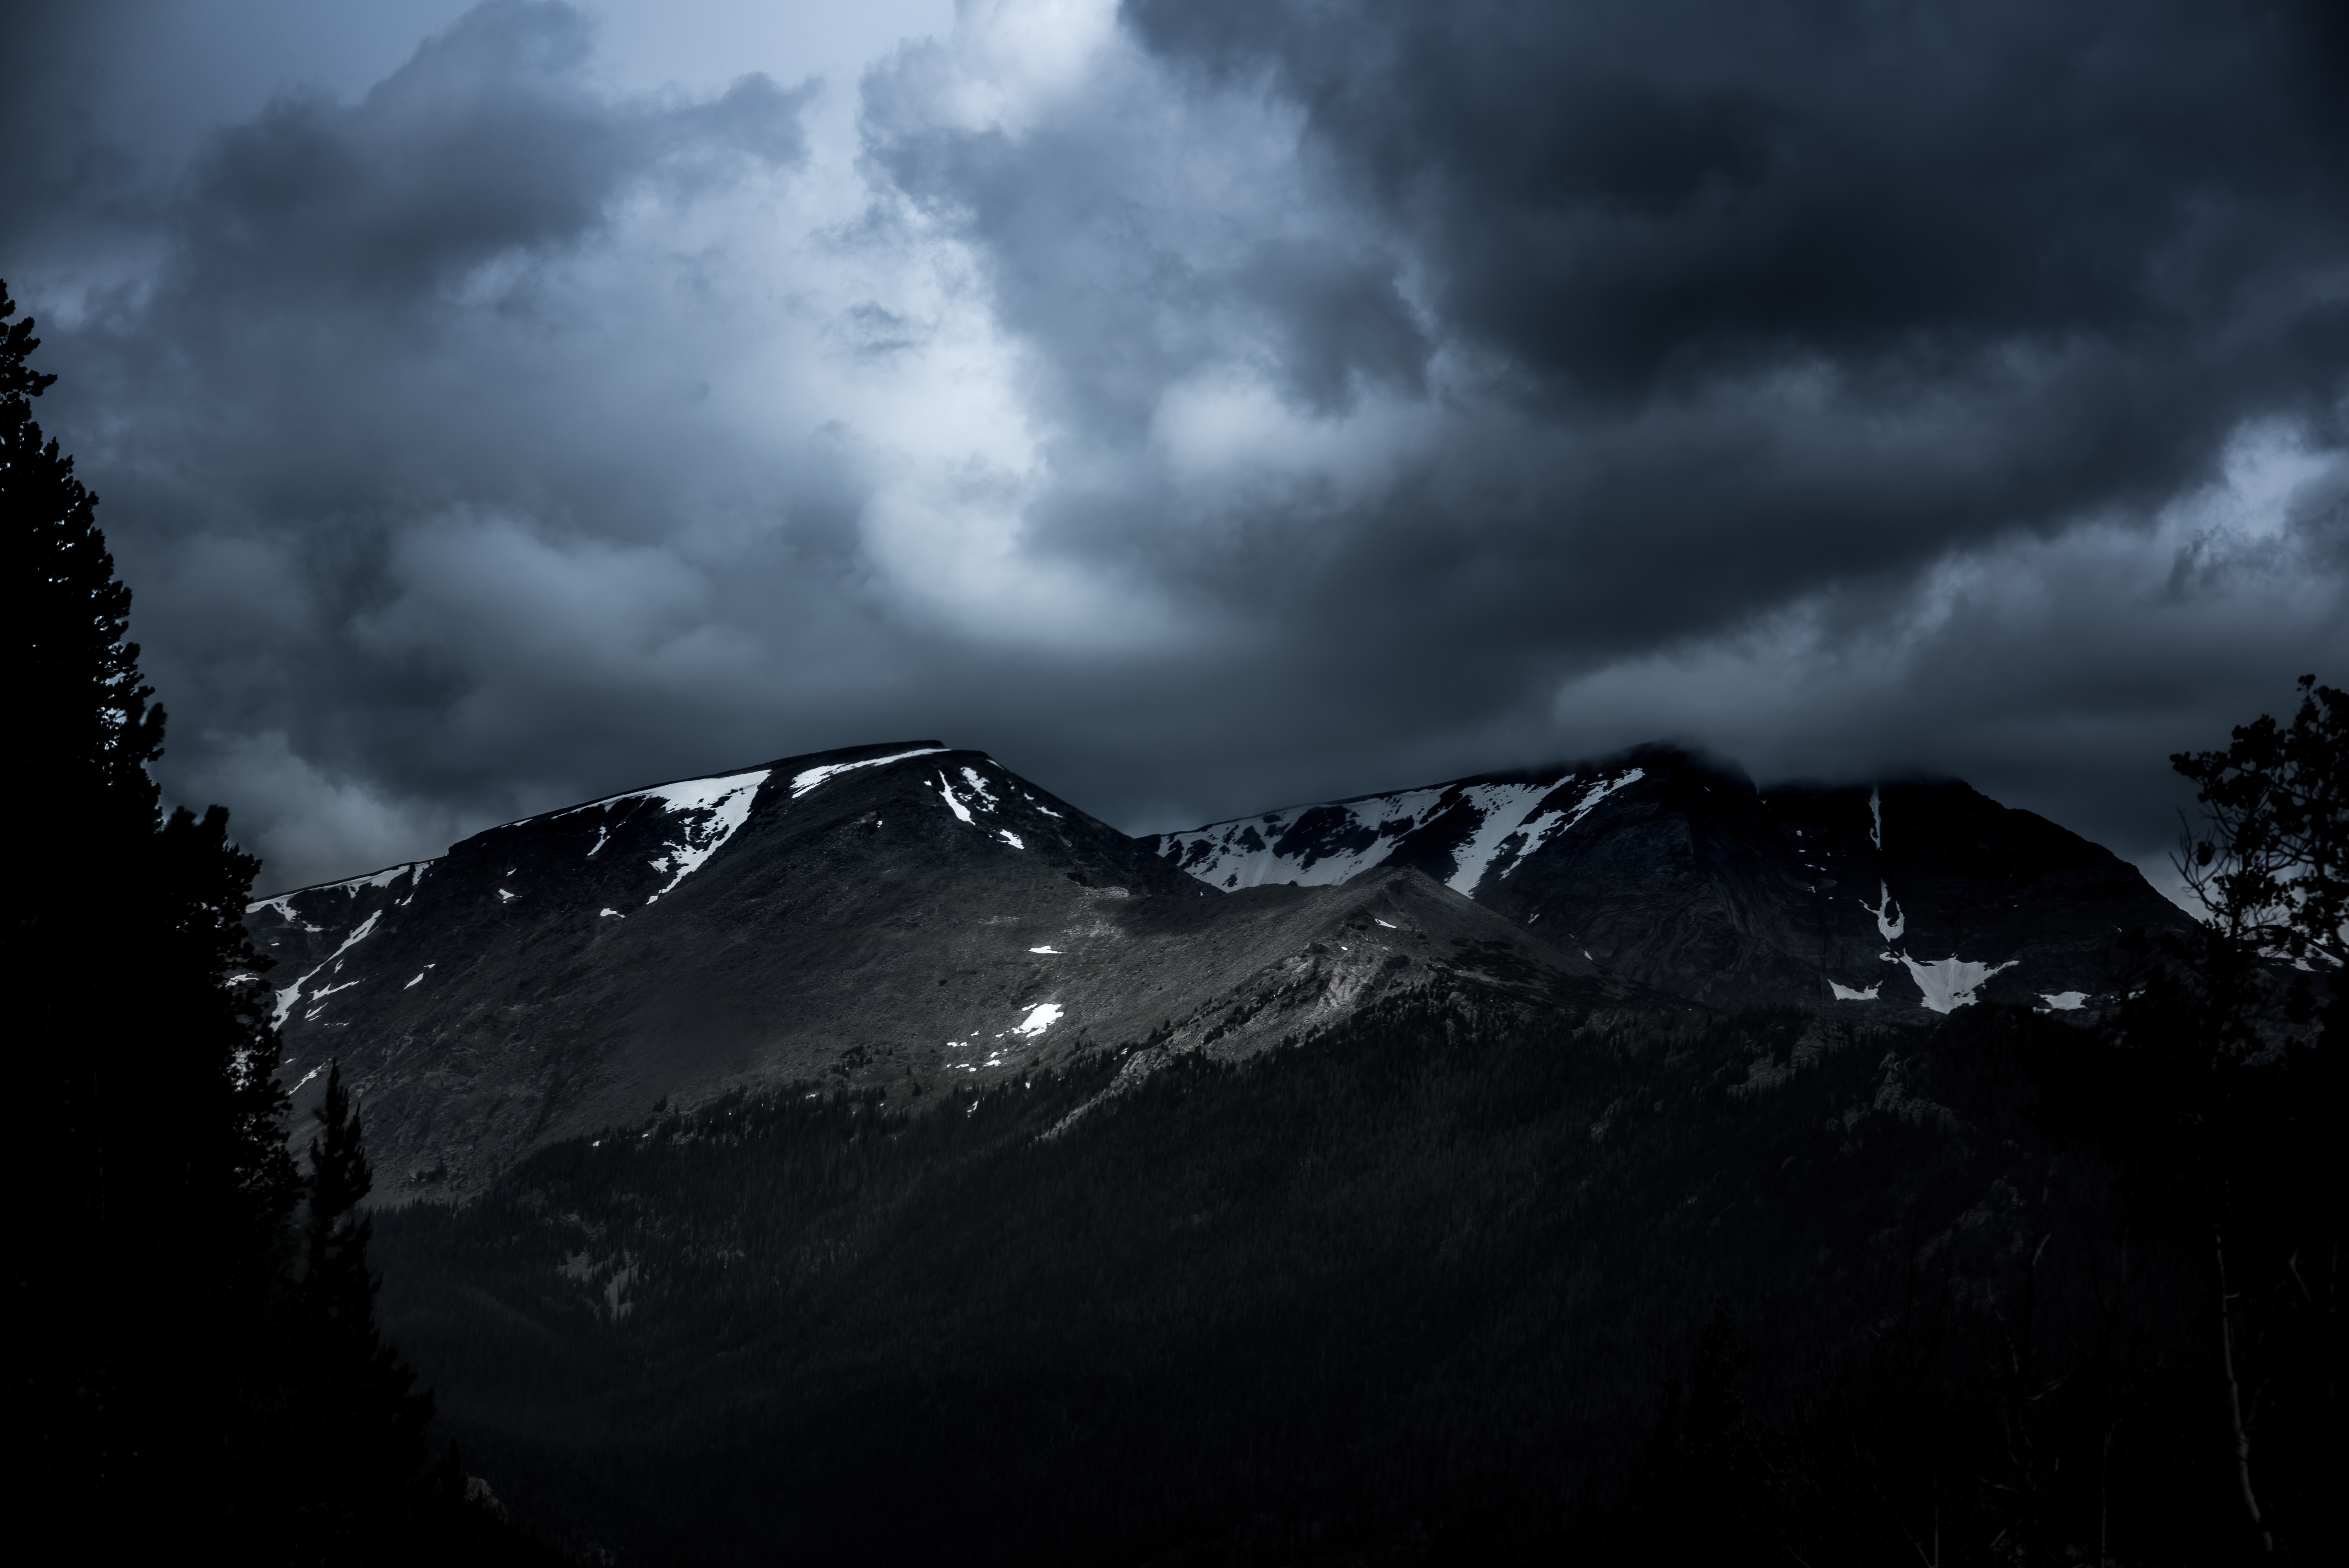 white and gray mountain under cloudy sky during nighttime